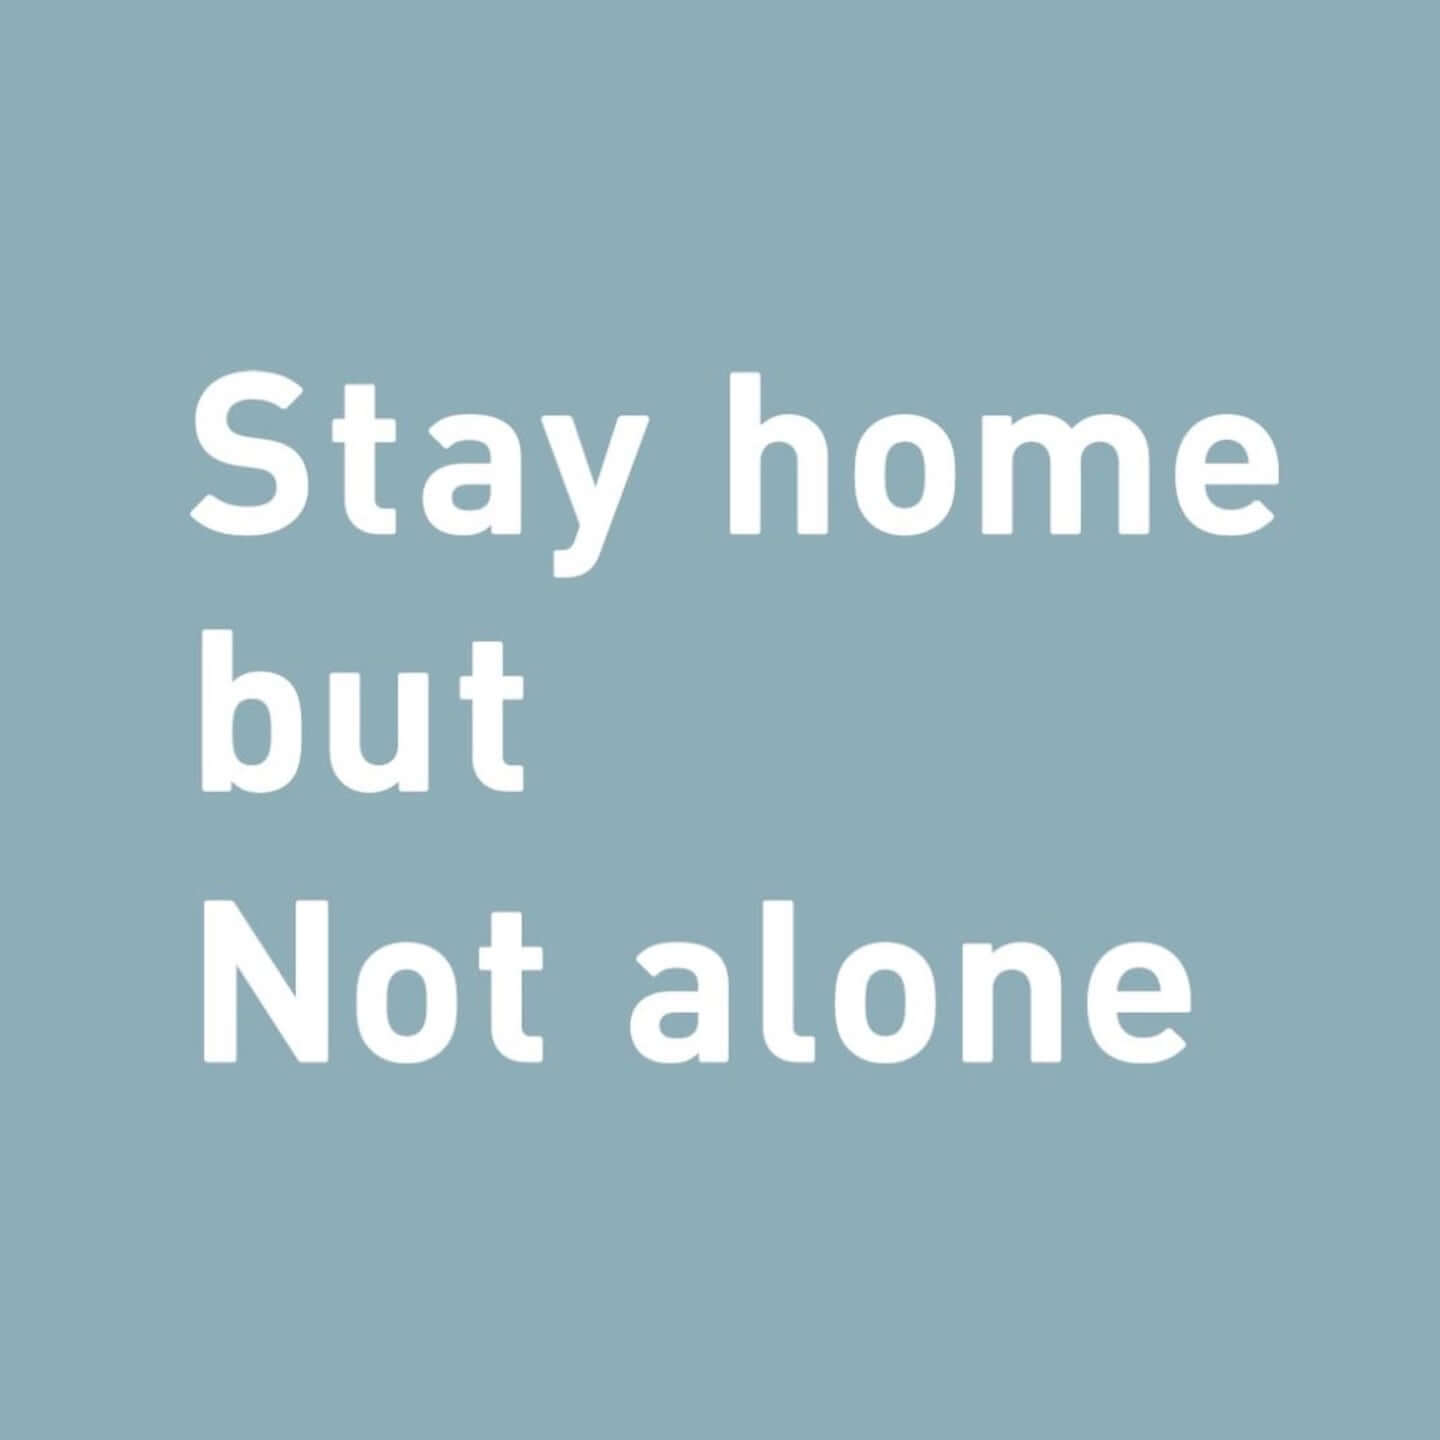 Stay home but Not alone